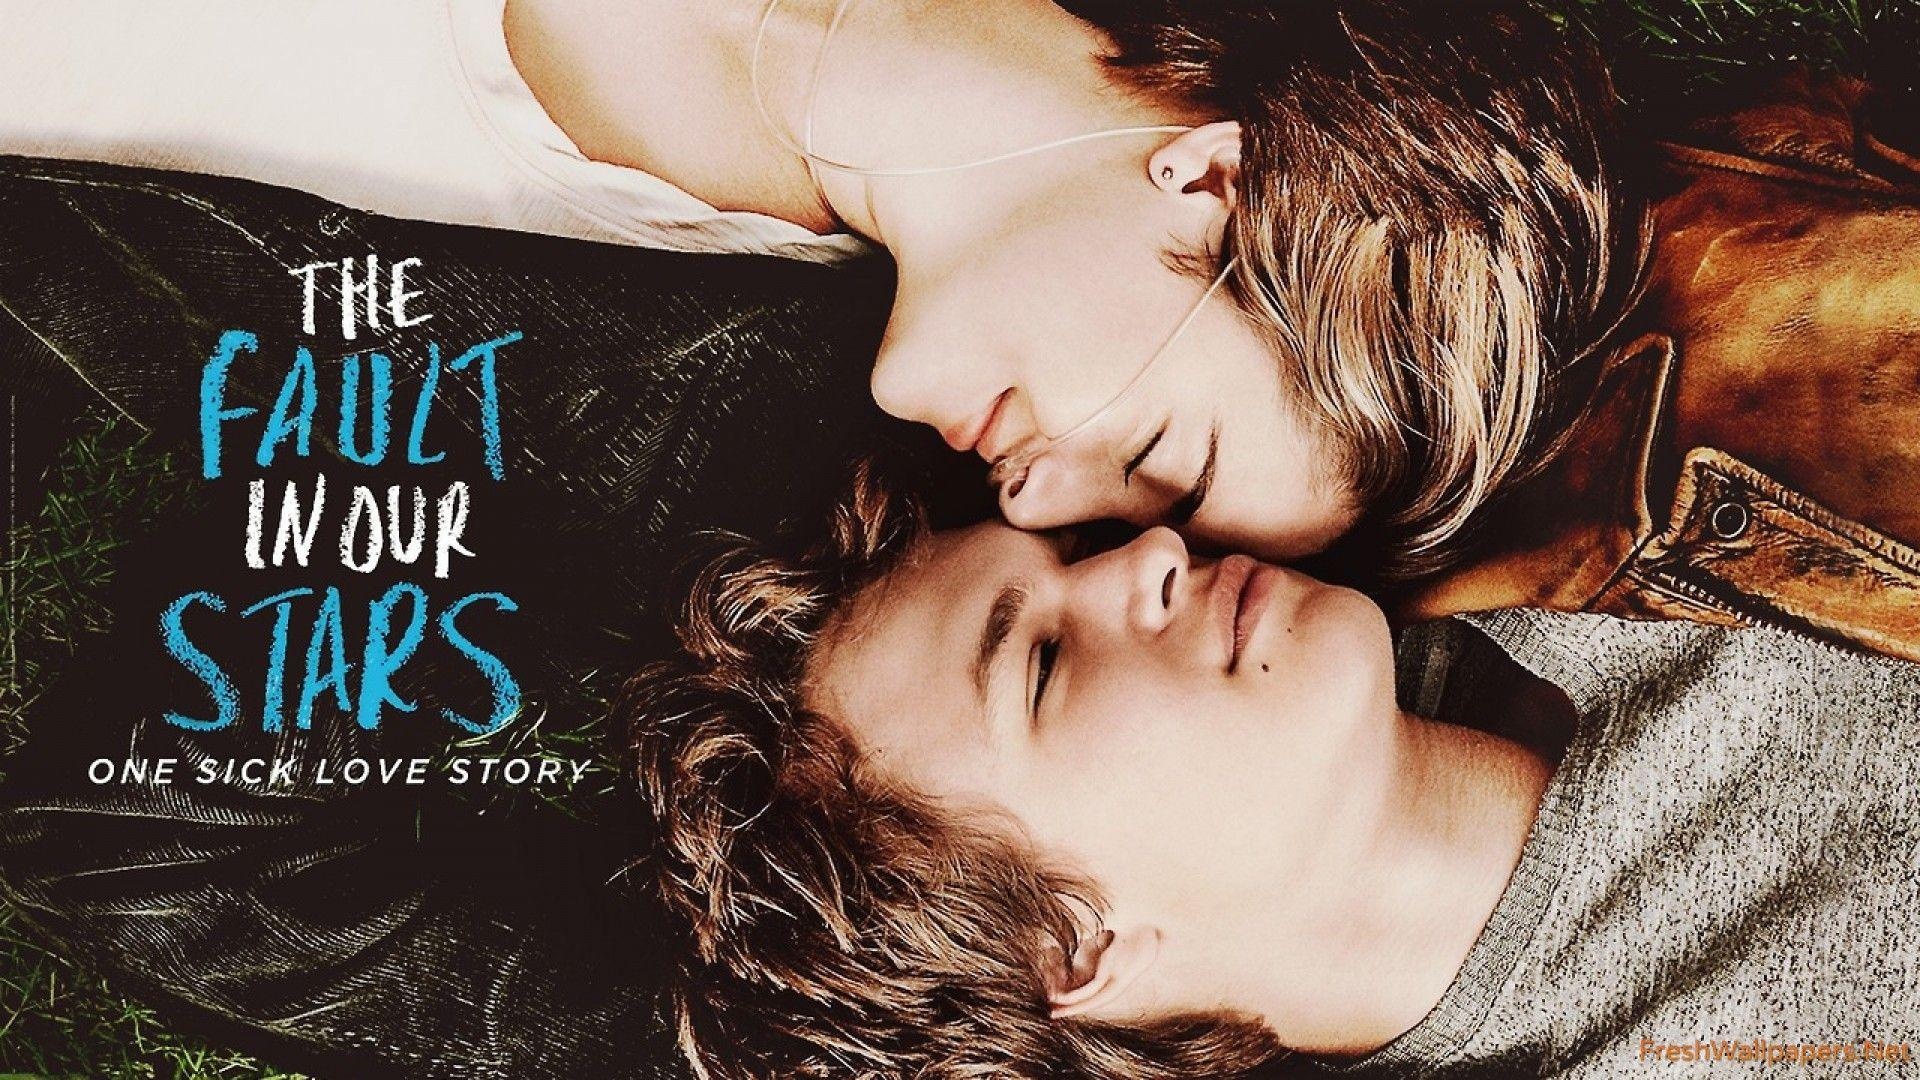 The Fault in Our Stars, Inspirational quotes, Life's fragility, Beautiful moments, 1920x1080 Full HD Desktop